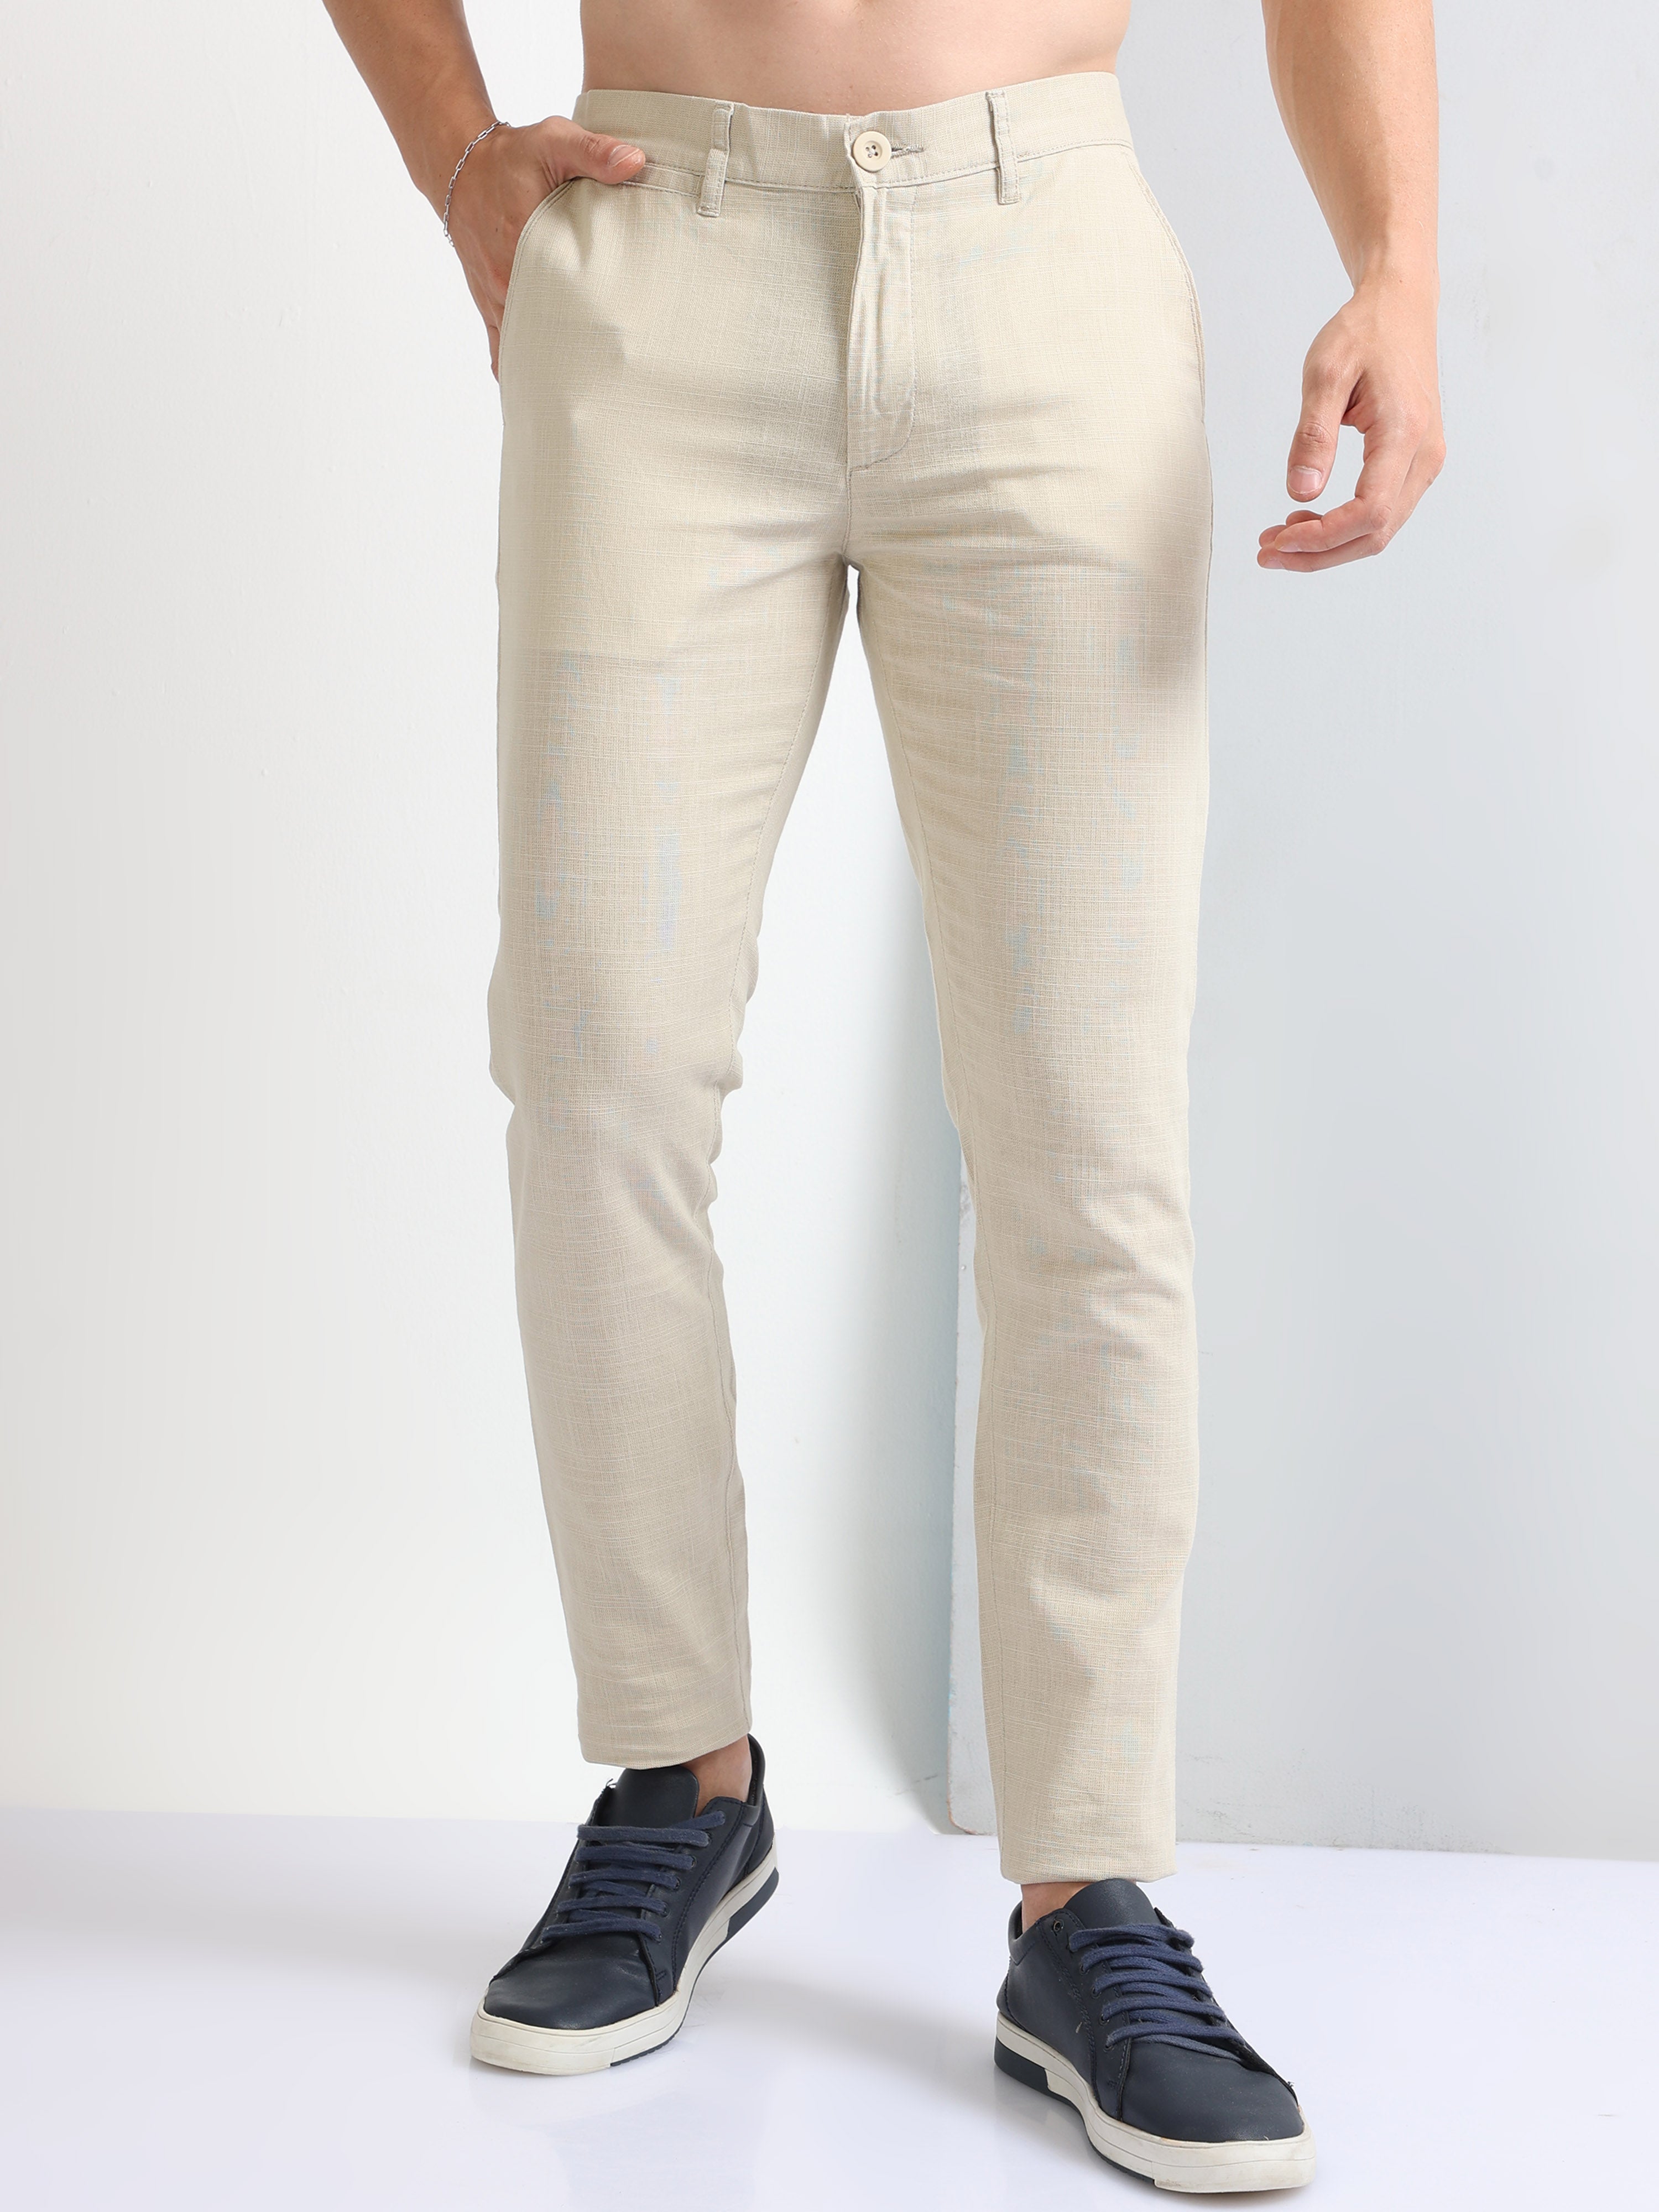 Skinny Fit Suit trousers - Beige/Checked - Men | H&M IN